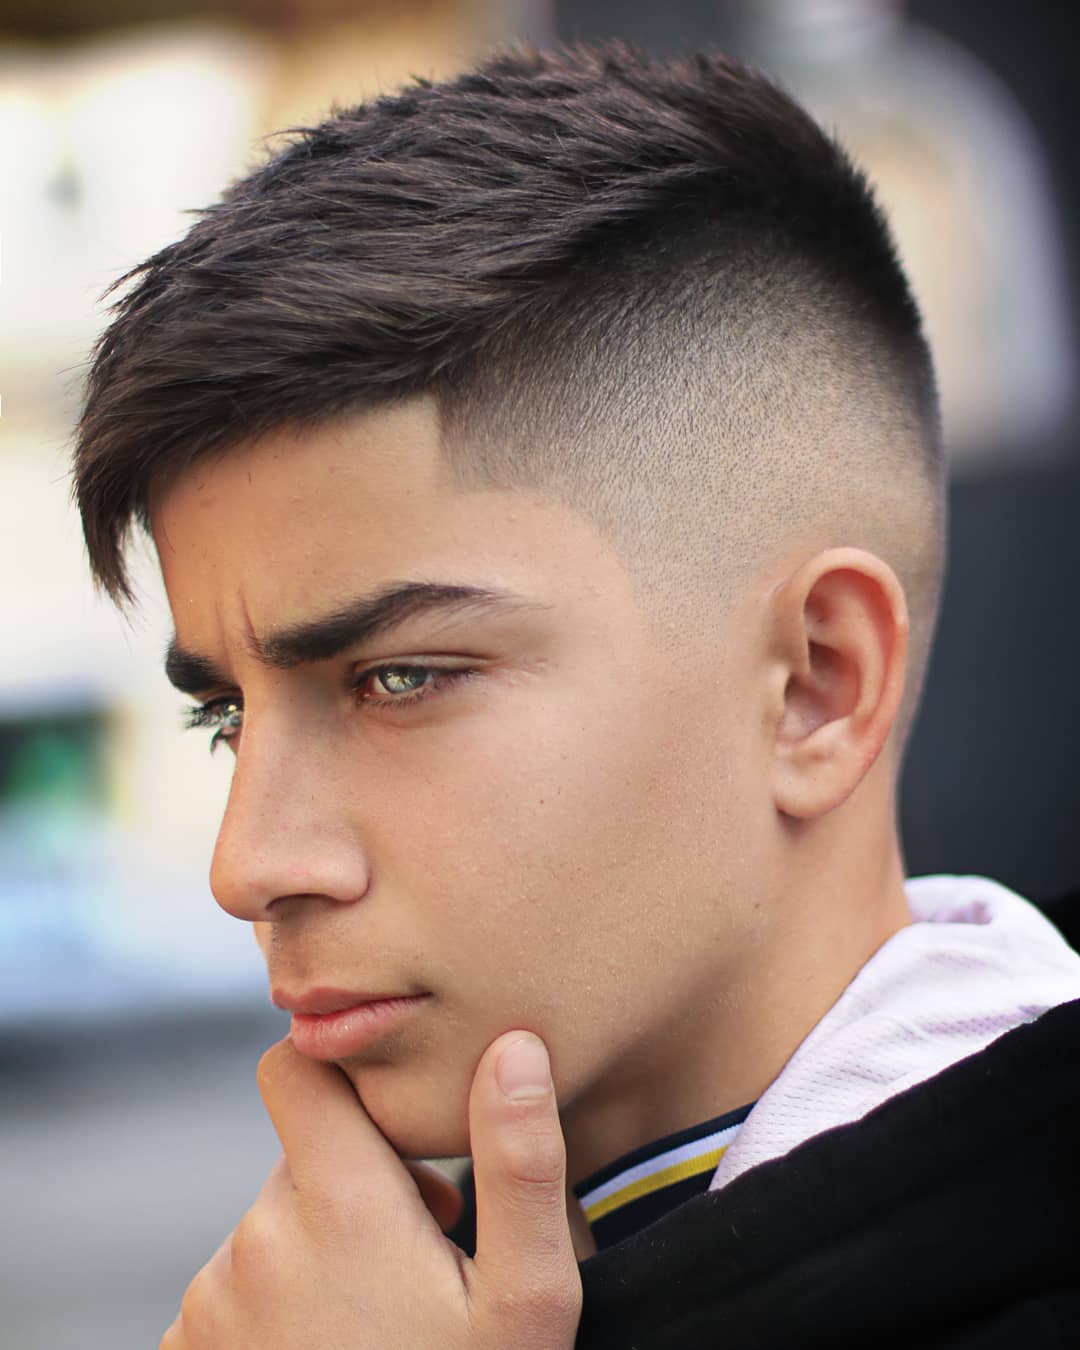 25 Bald Fade Haircuts That Will Keep You Super Cool -> June 2021